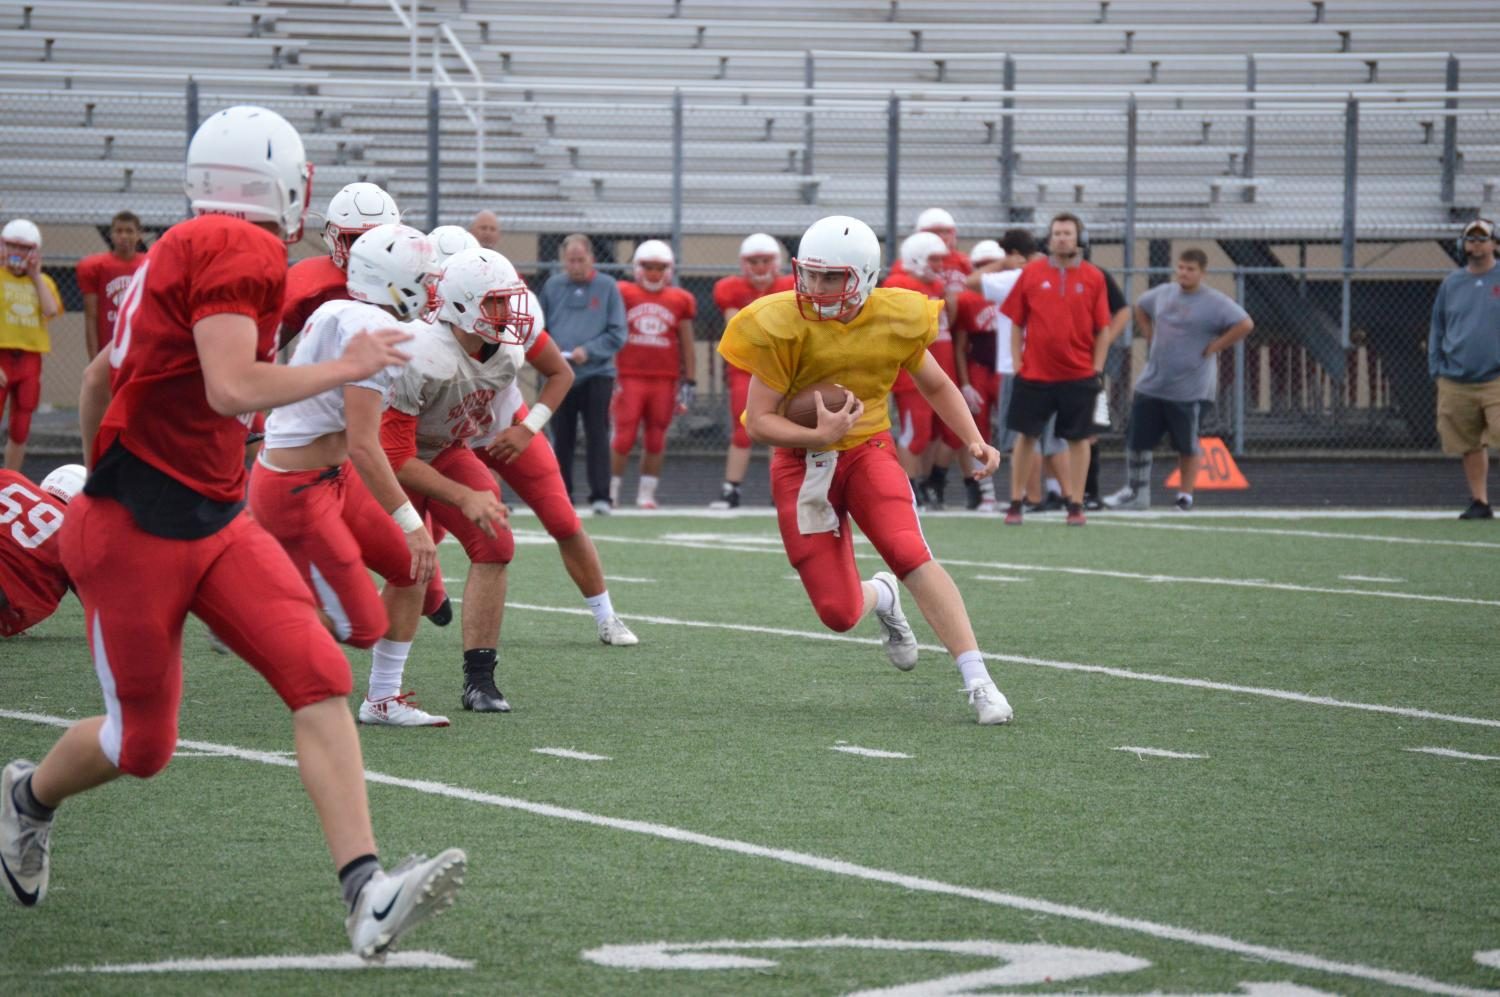 Junior Eddie Schott, in yellow, runs the ball up the field at the scrimmage game on Friday, Aug 4. Schott is beginning his second season as the SHS starting quarterback for the football team.